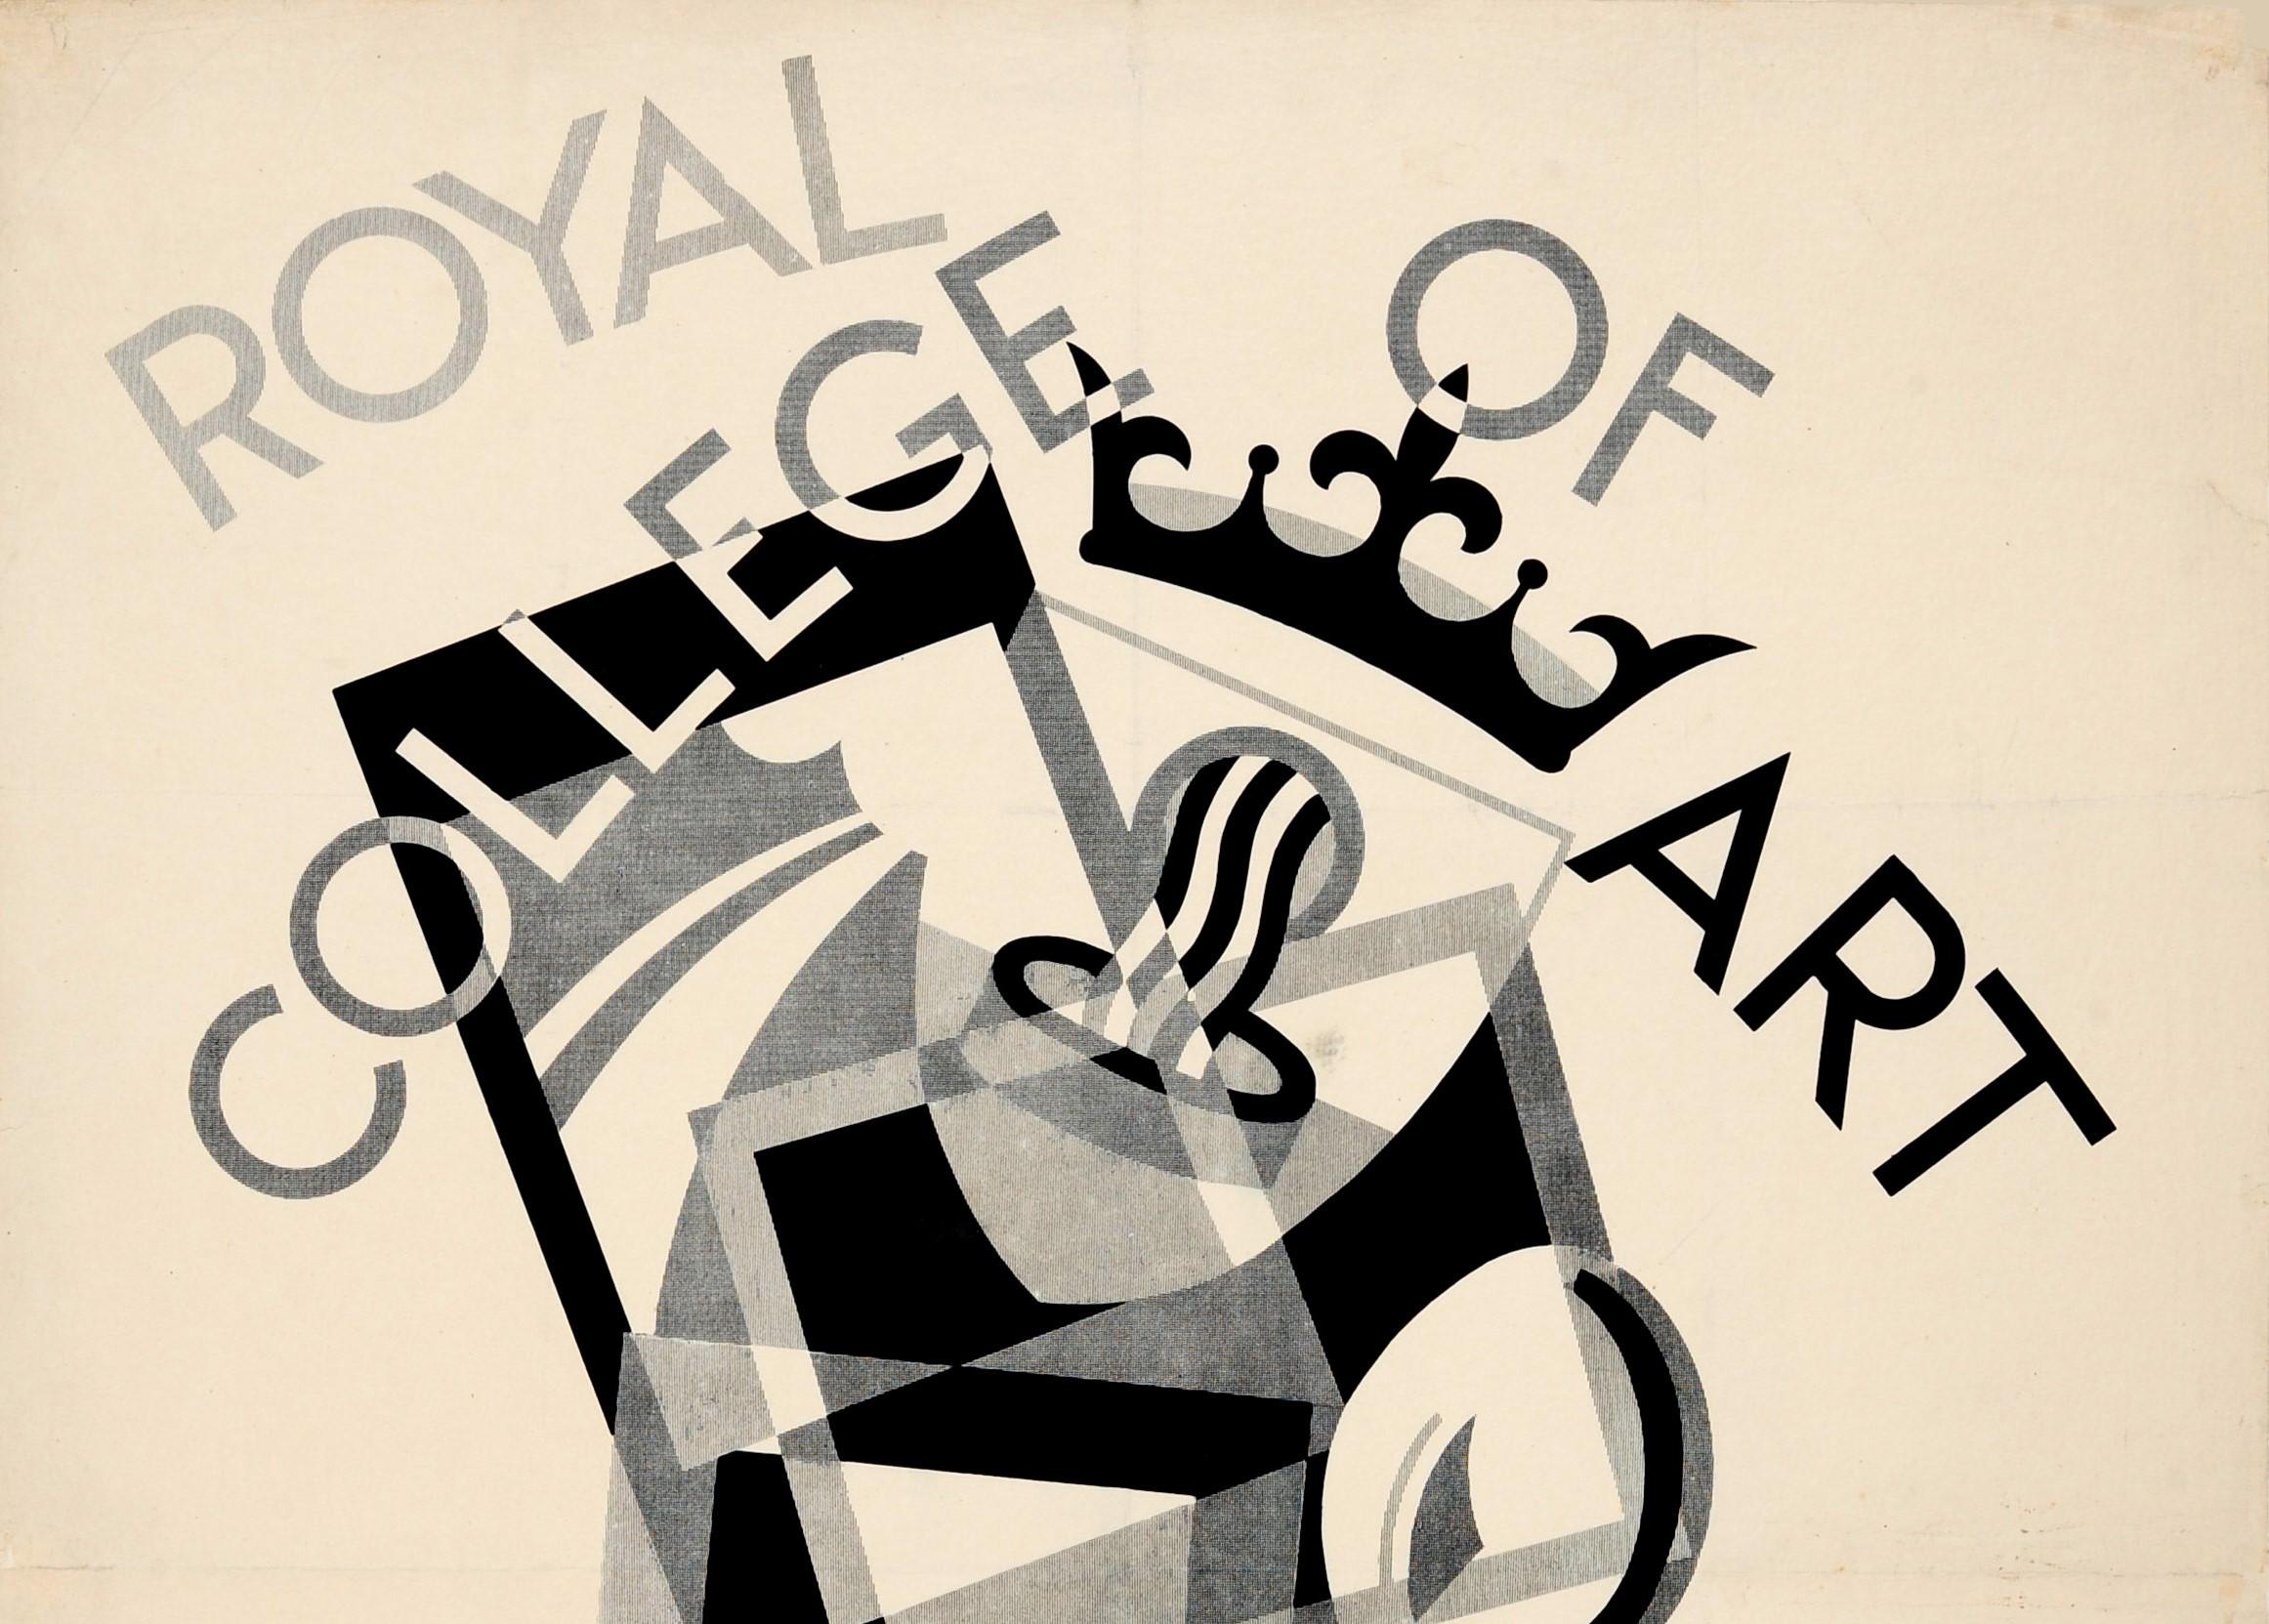 Original vintage advertising poster for the Royal College of Art Sketch Club Exhibition held in the North Court of the Victoria and Albert Museum from October 27th to November 10th 1928. Stylised black and white design featuring a human figure,